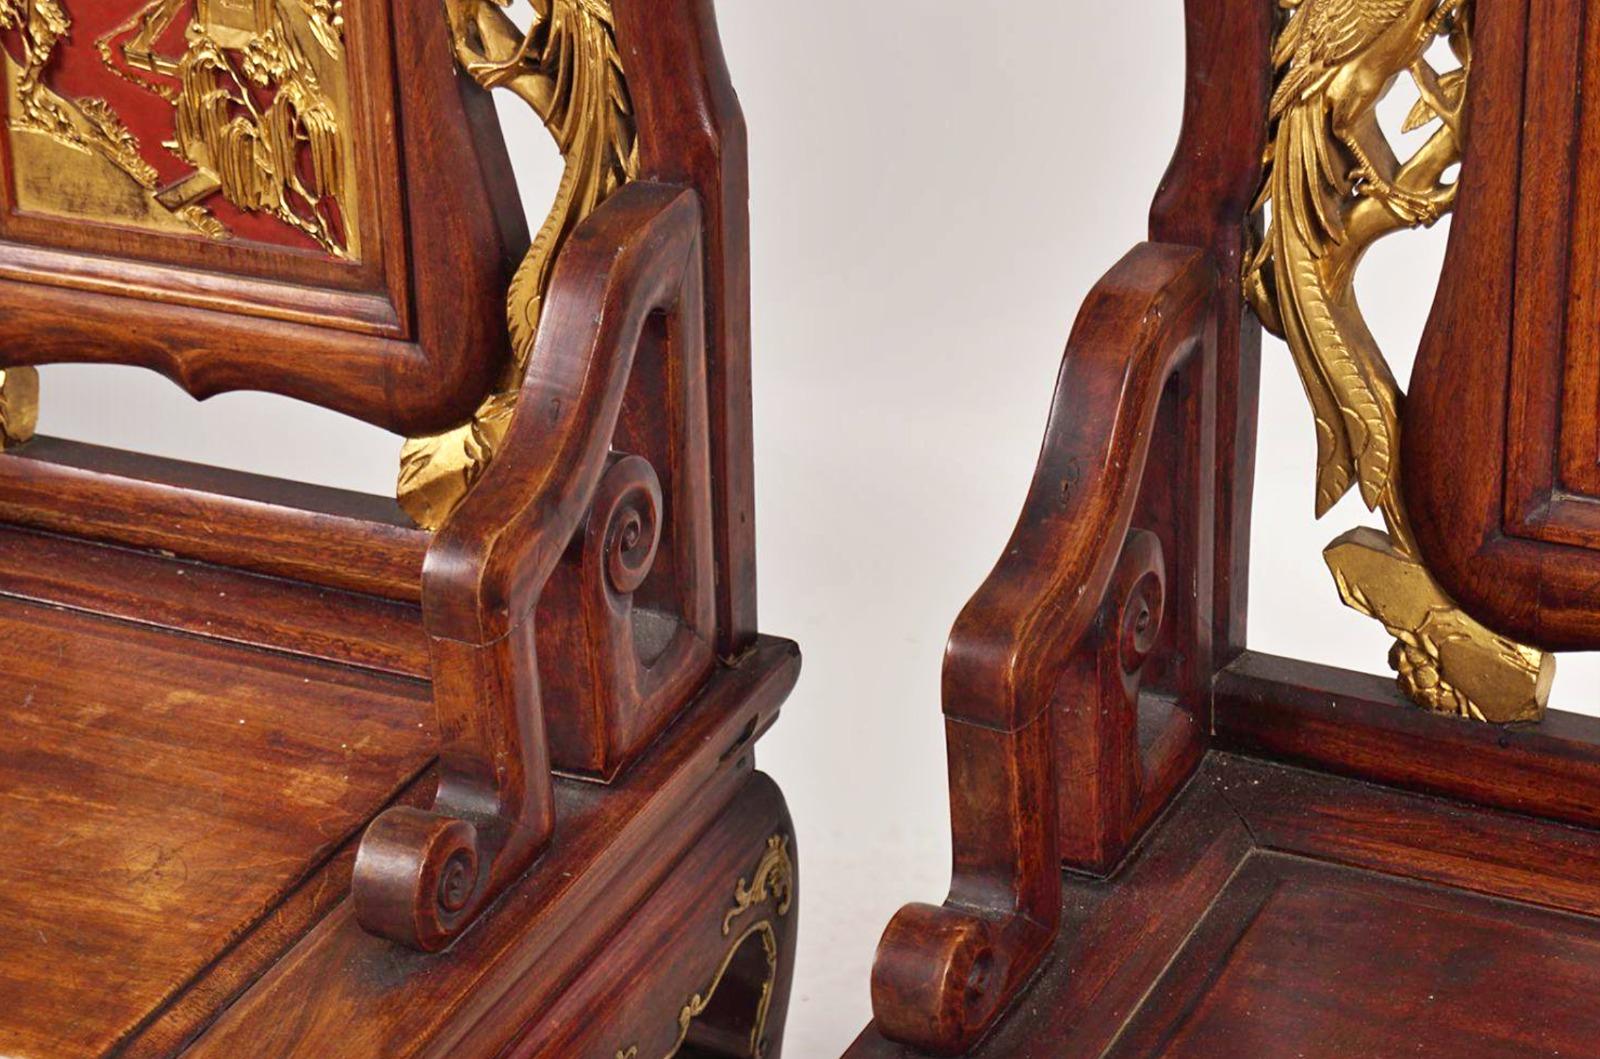 Pair Chinese Qing ceremonial chairs 19th century

Each with a profusely carved and parcel-gilt back above a panelled seat, 
raised on scroll legs to the fore, joined by stretcher rails.

Measures: 102 cm. high; 53 cm. wide; 44 cm. deep

Very